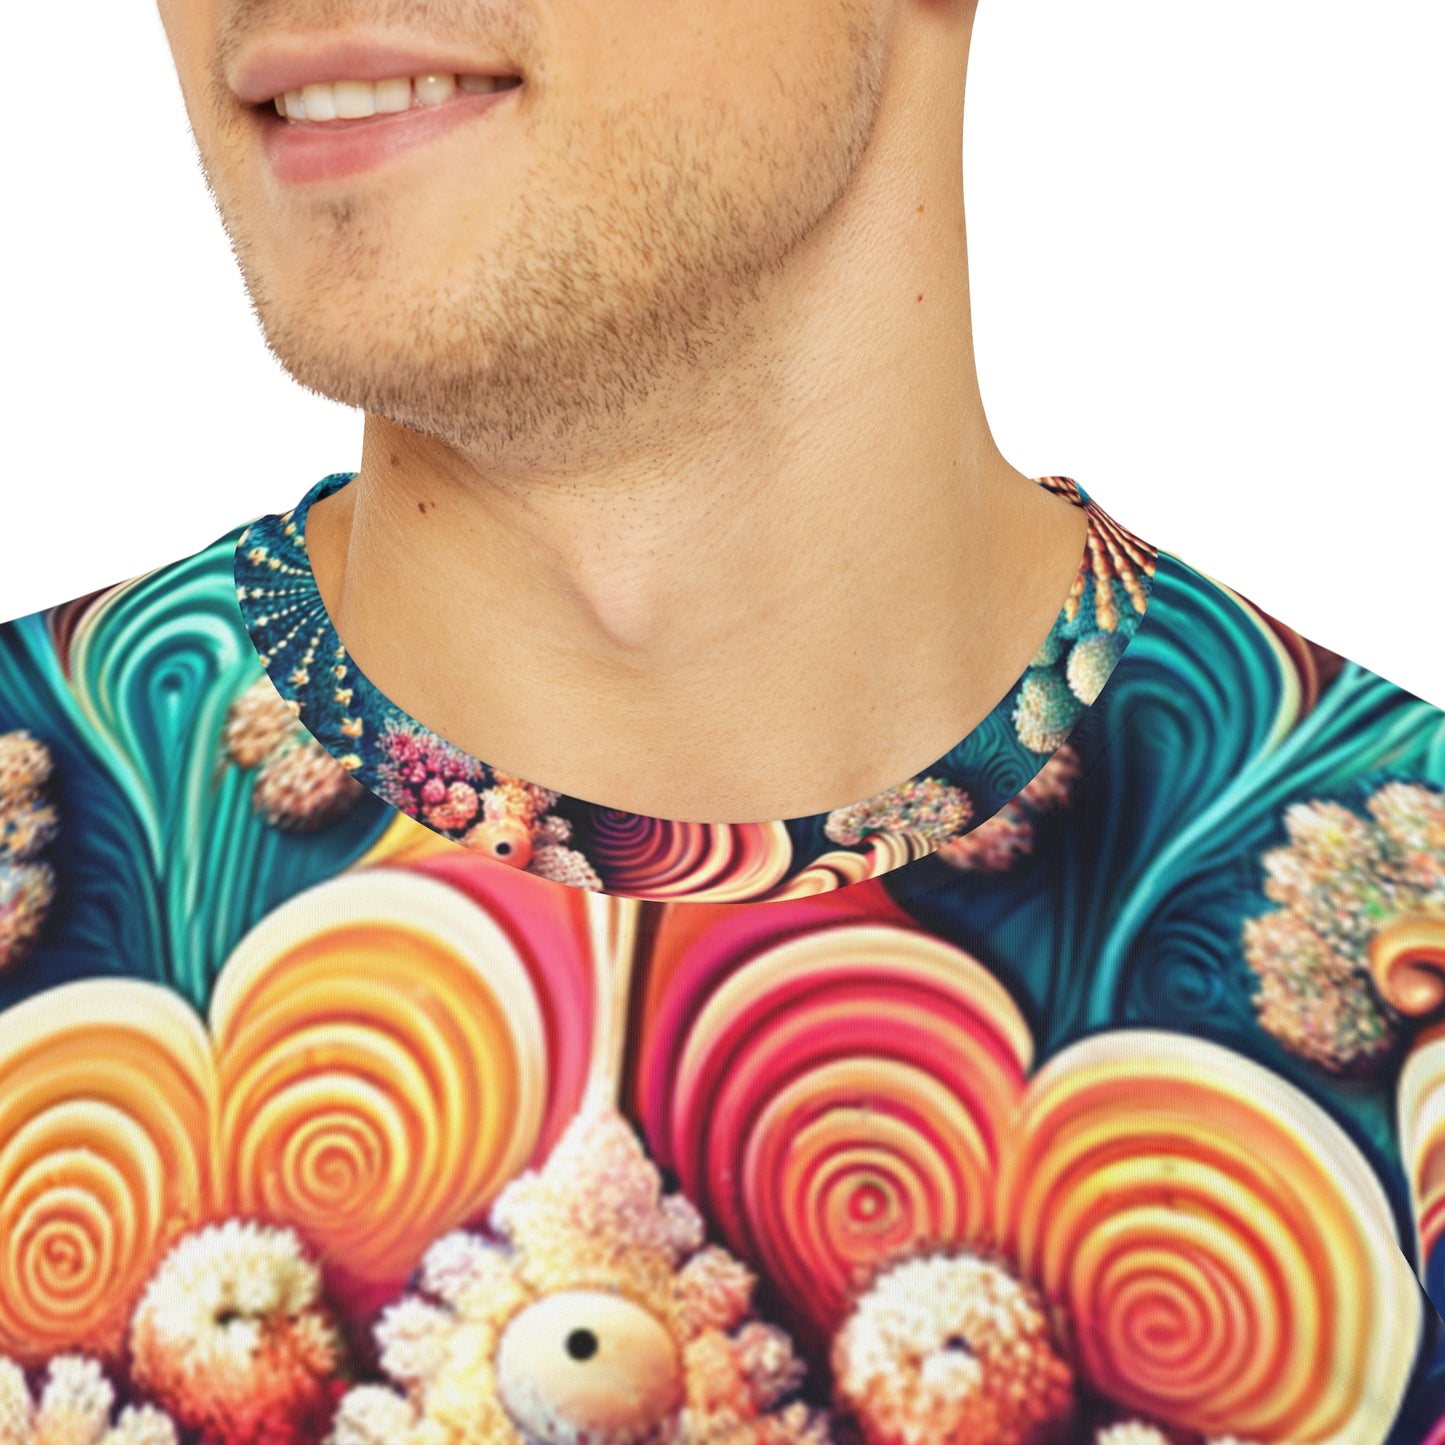 Close-up shot of the Coral Mandala Whirl Pattern Crewneck Pullover All-Over Print Short-Sleeved Shirt black red  orange yellow blue mandala swirl pattern worn by a white man